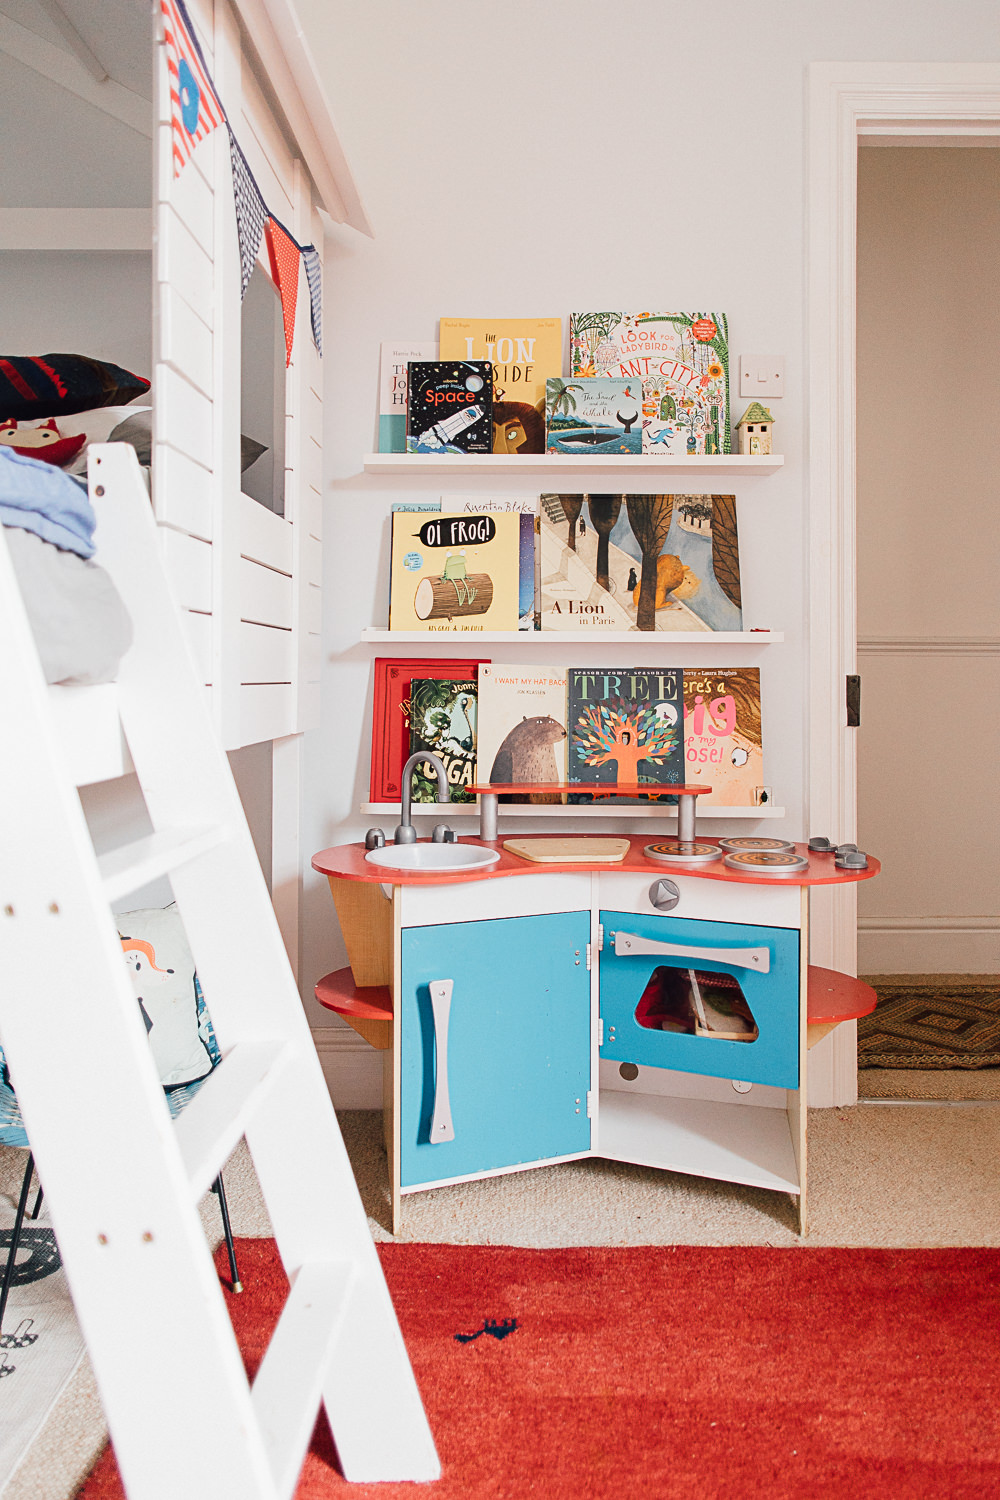 Toy kitchen beneath a colourful book wall